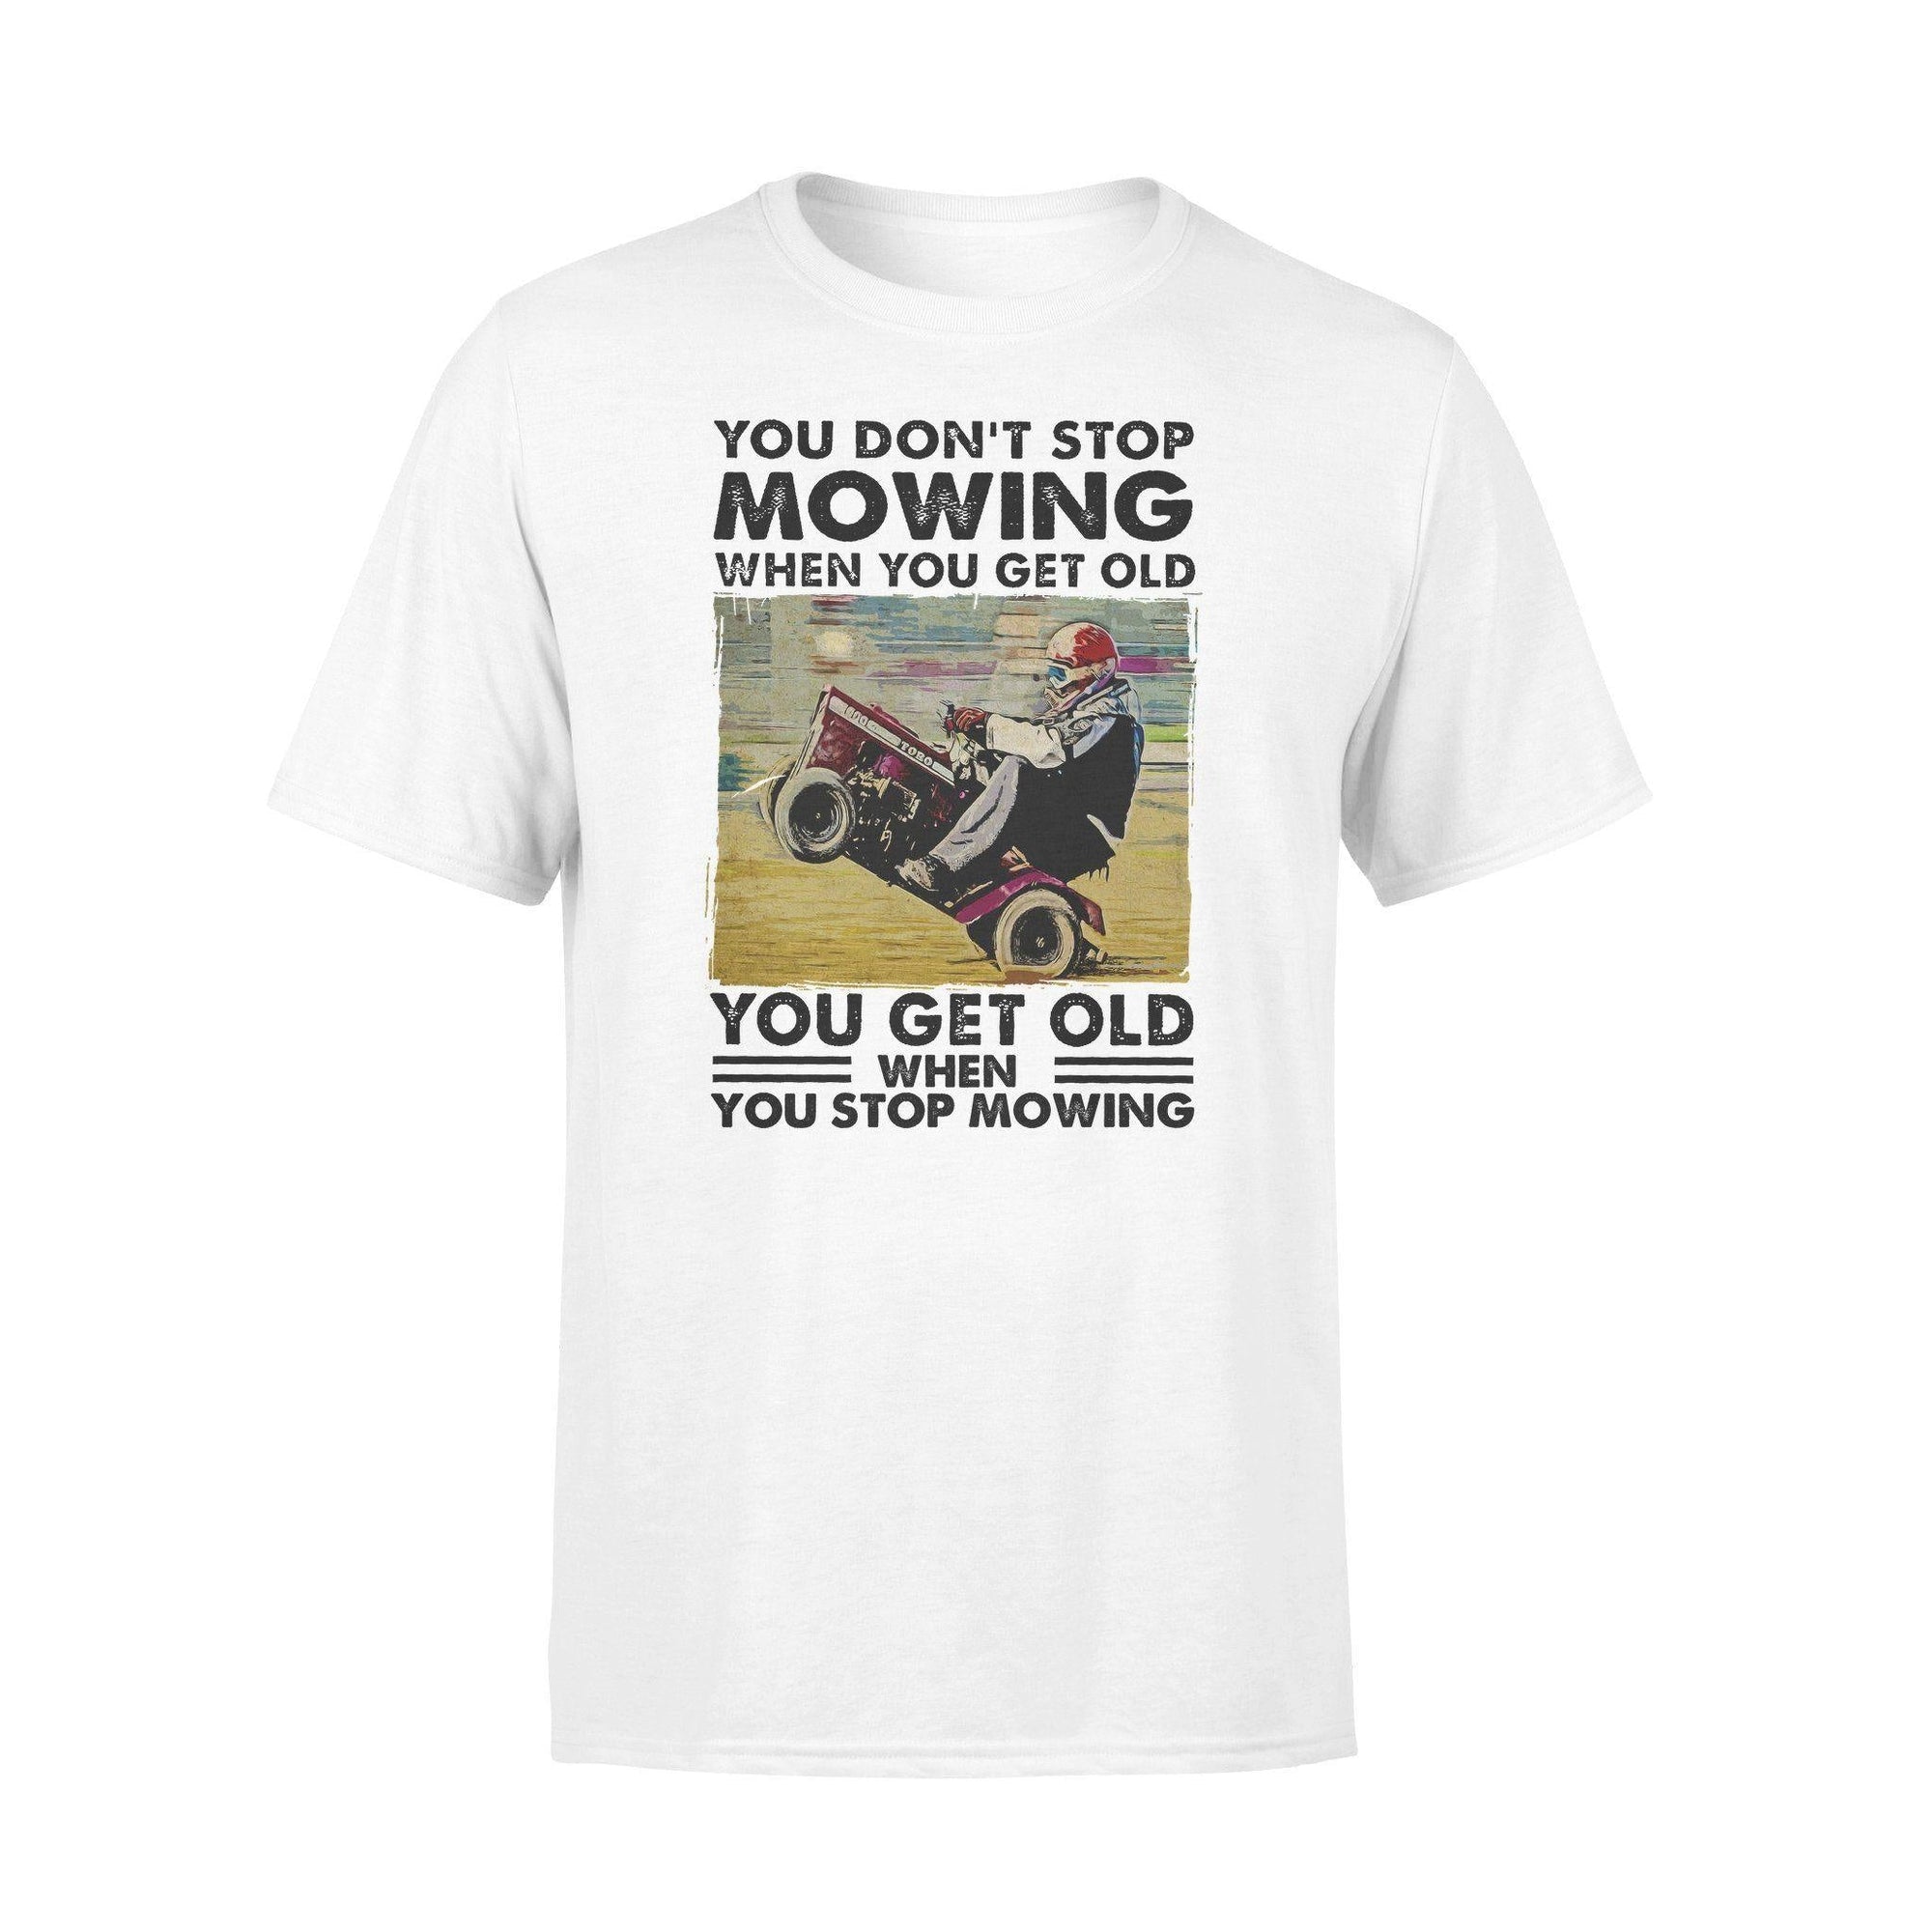 Lawn Mower You Don't Stop Mowing - Standard T-shirt - PERSONAL84